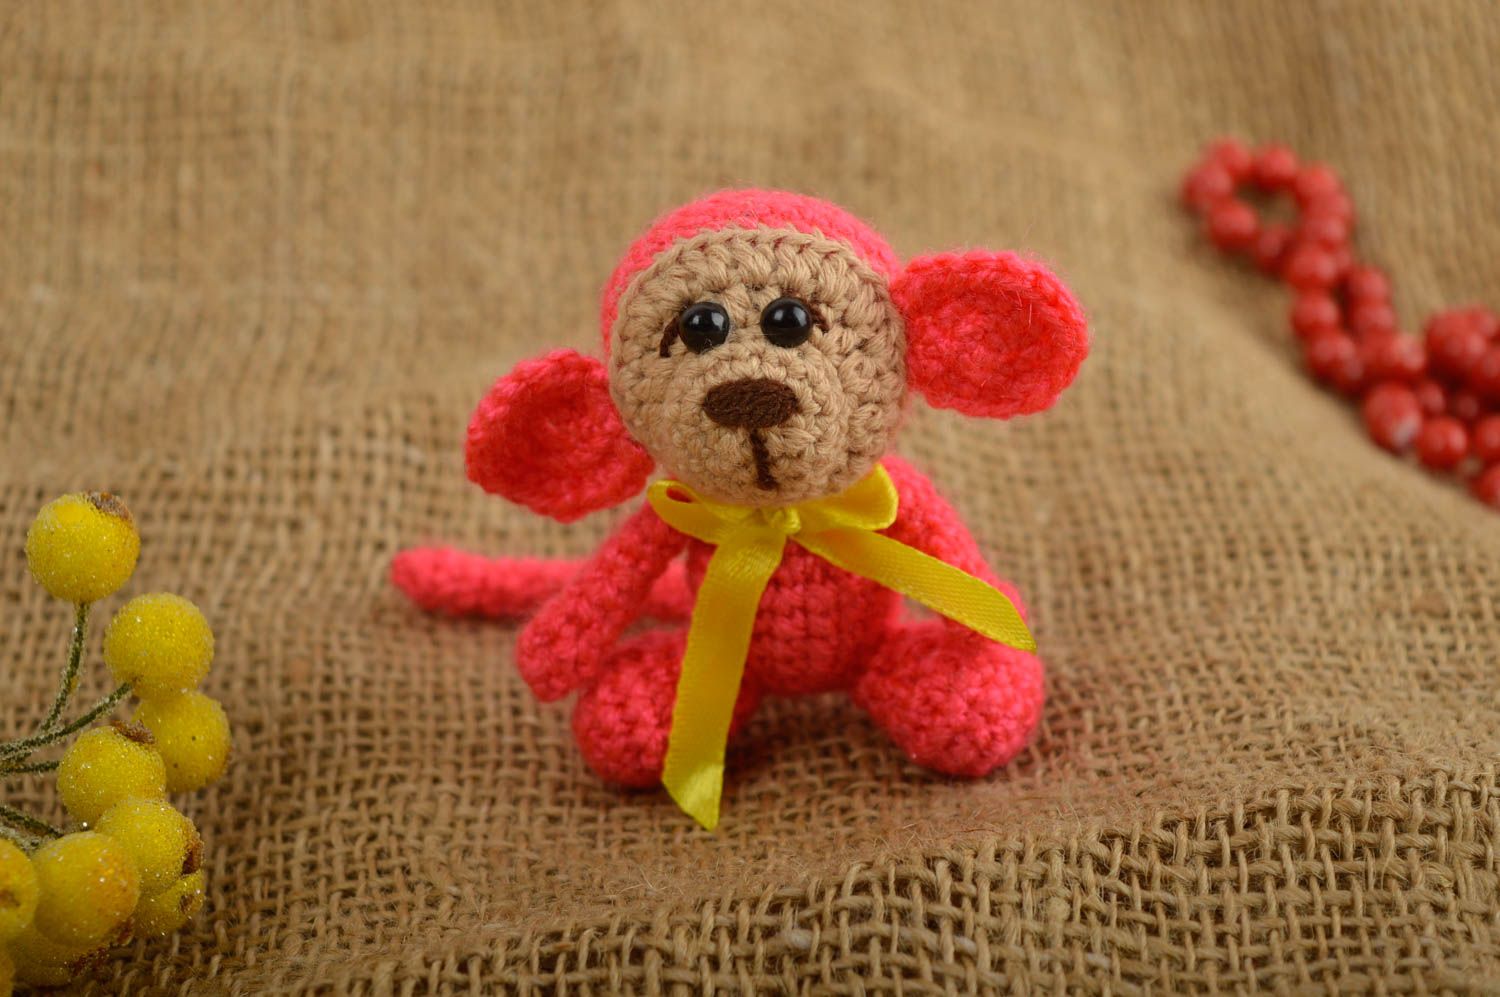 Crocheted handmade toys decorative soft toys for children stuffed toys for baby photo 1